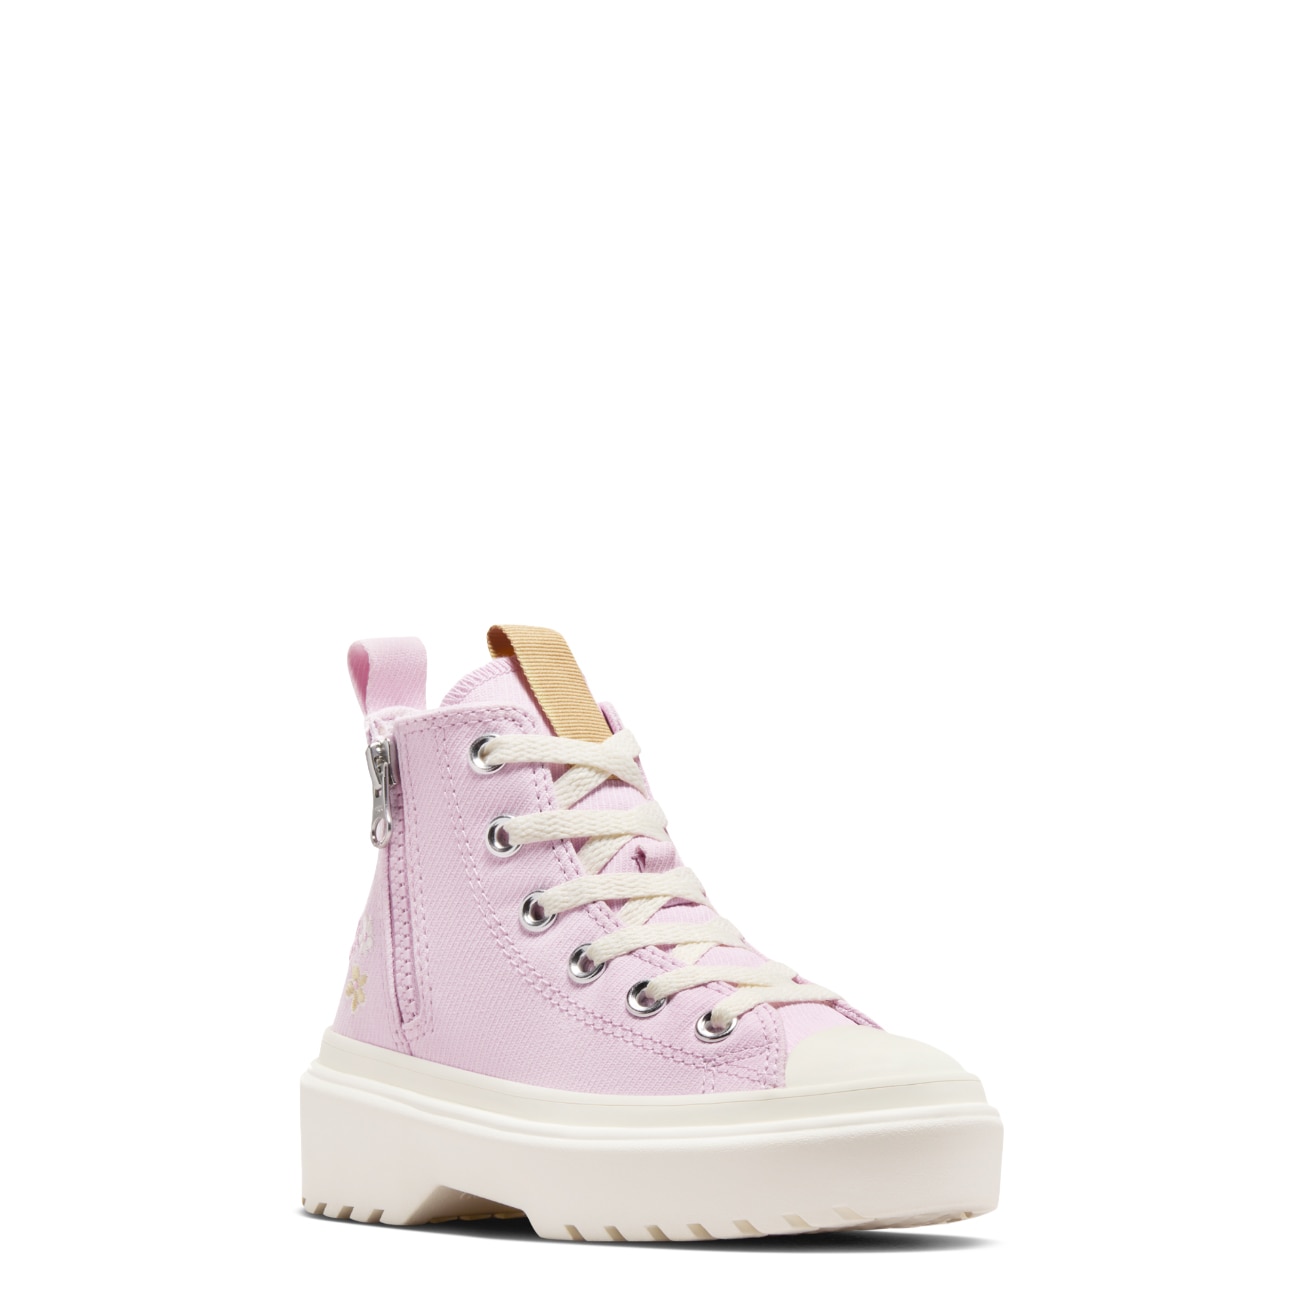 Youth Girls' Chuck Taylor All Star Lugged Lift Platform Flowers High Top Sneaker